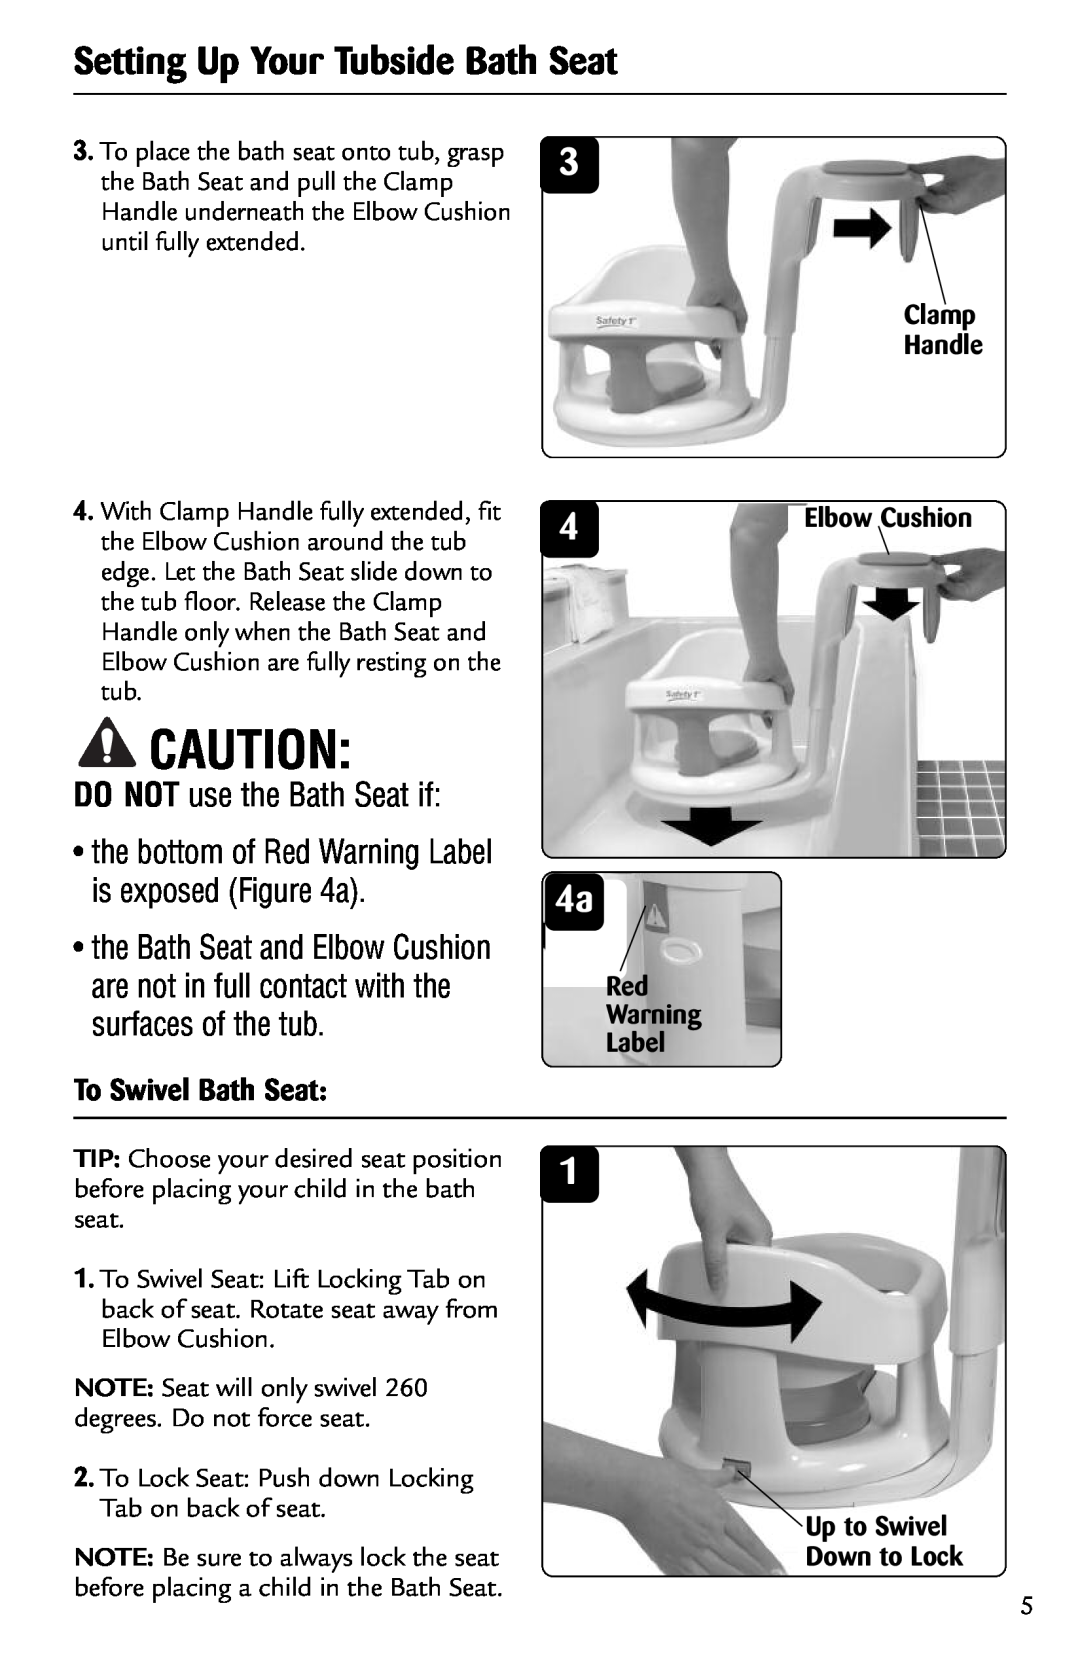 Safety 1st 44301A Setting Up Your Tubside Bath Seat, the bottom of Red Warning Label is exposed a, To Swivel Bath Seat 